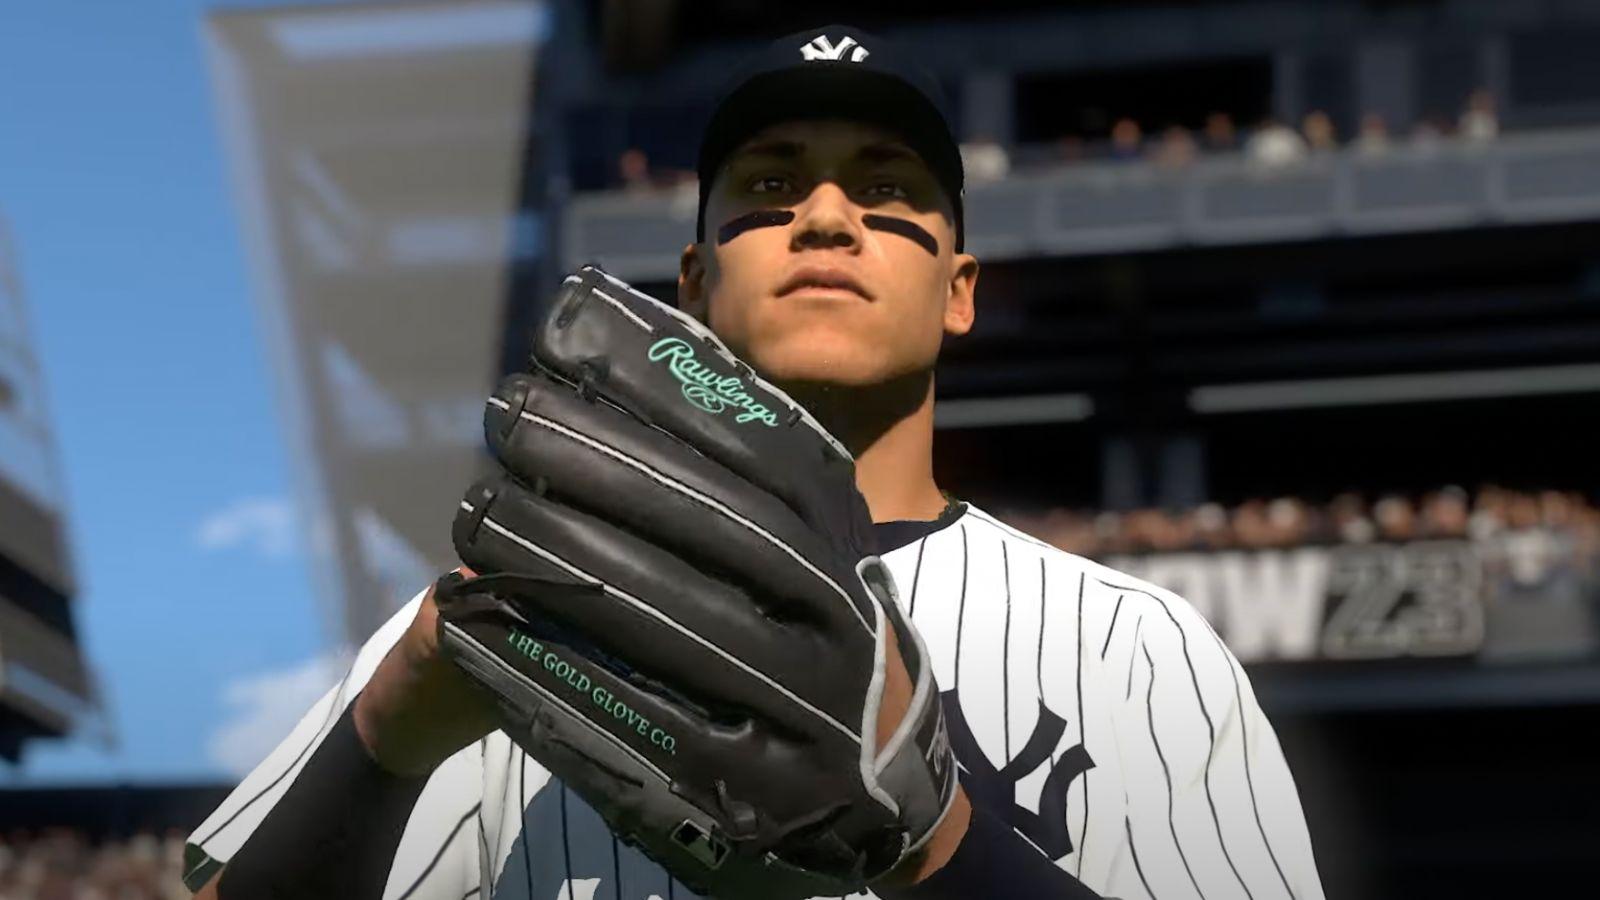 MLB the show 23 custom jersey: MLB The Show 23 Bug fixes: How can